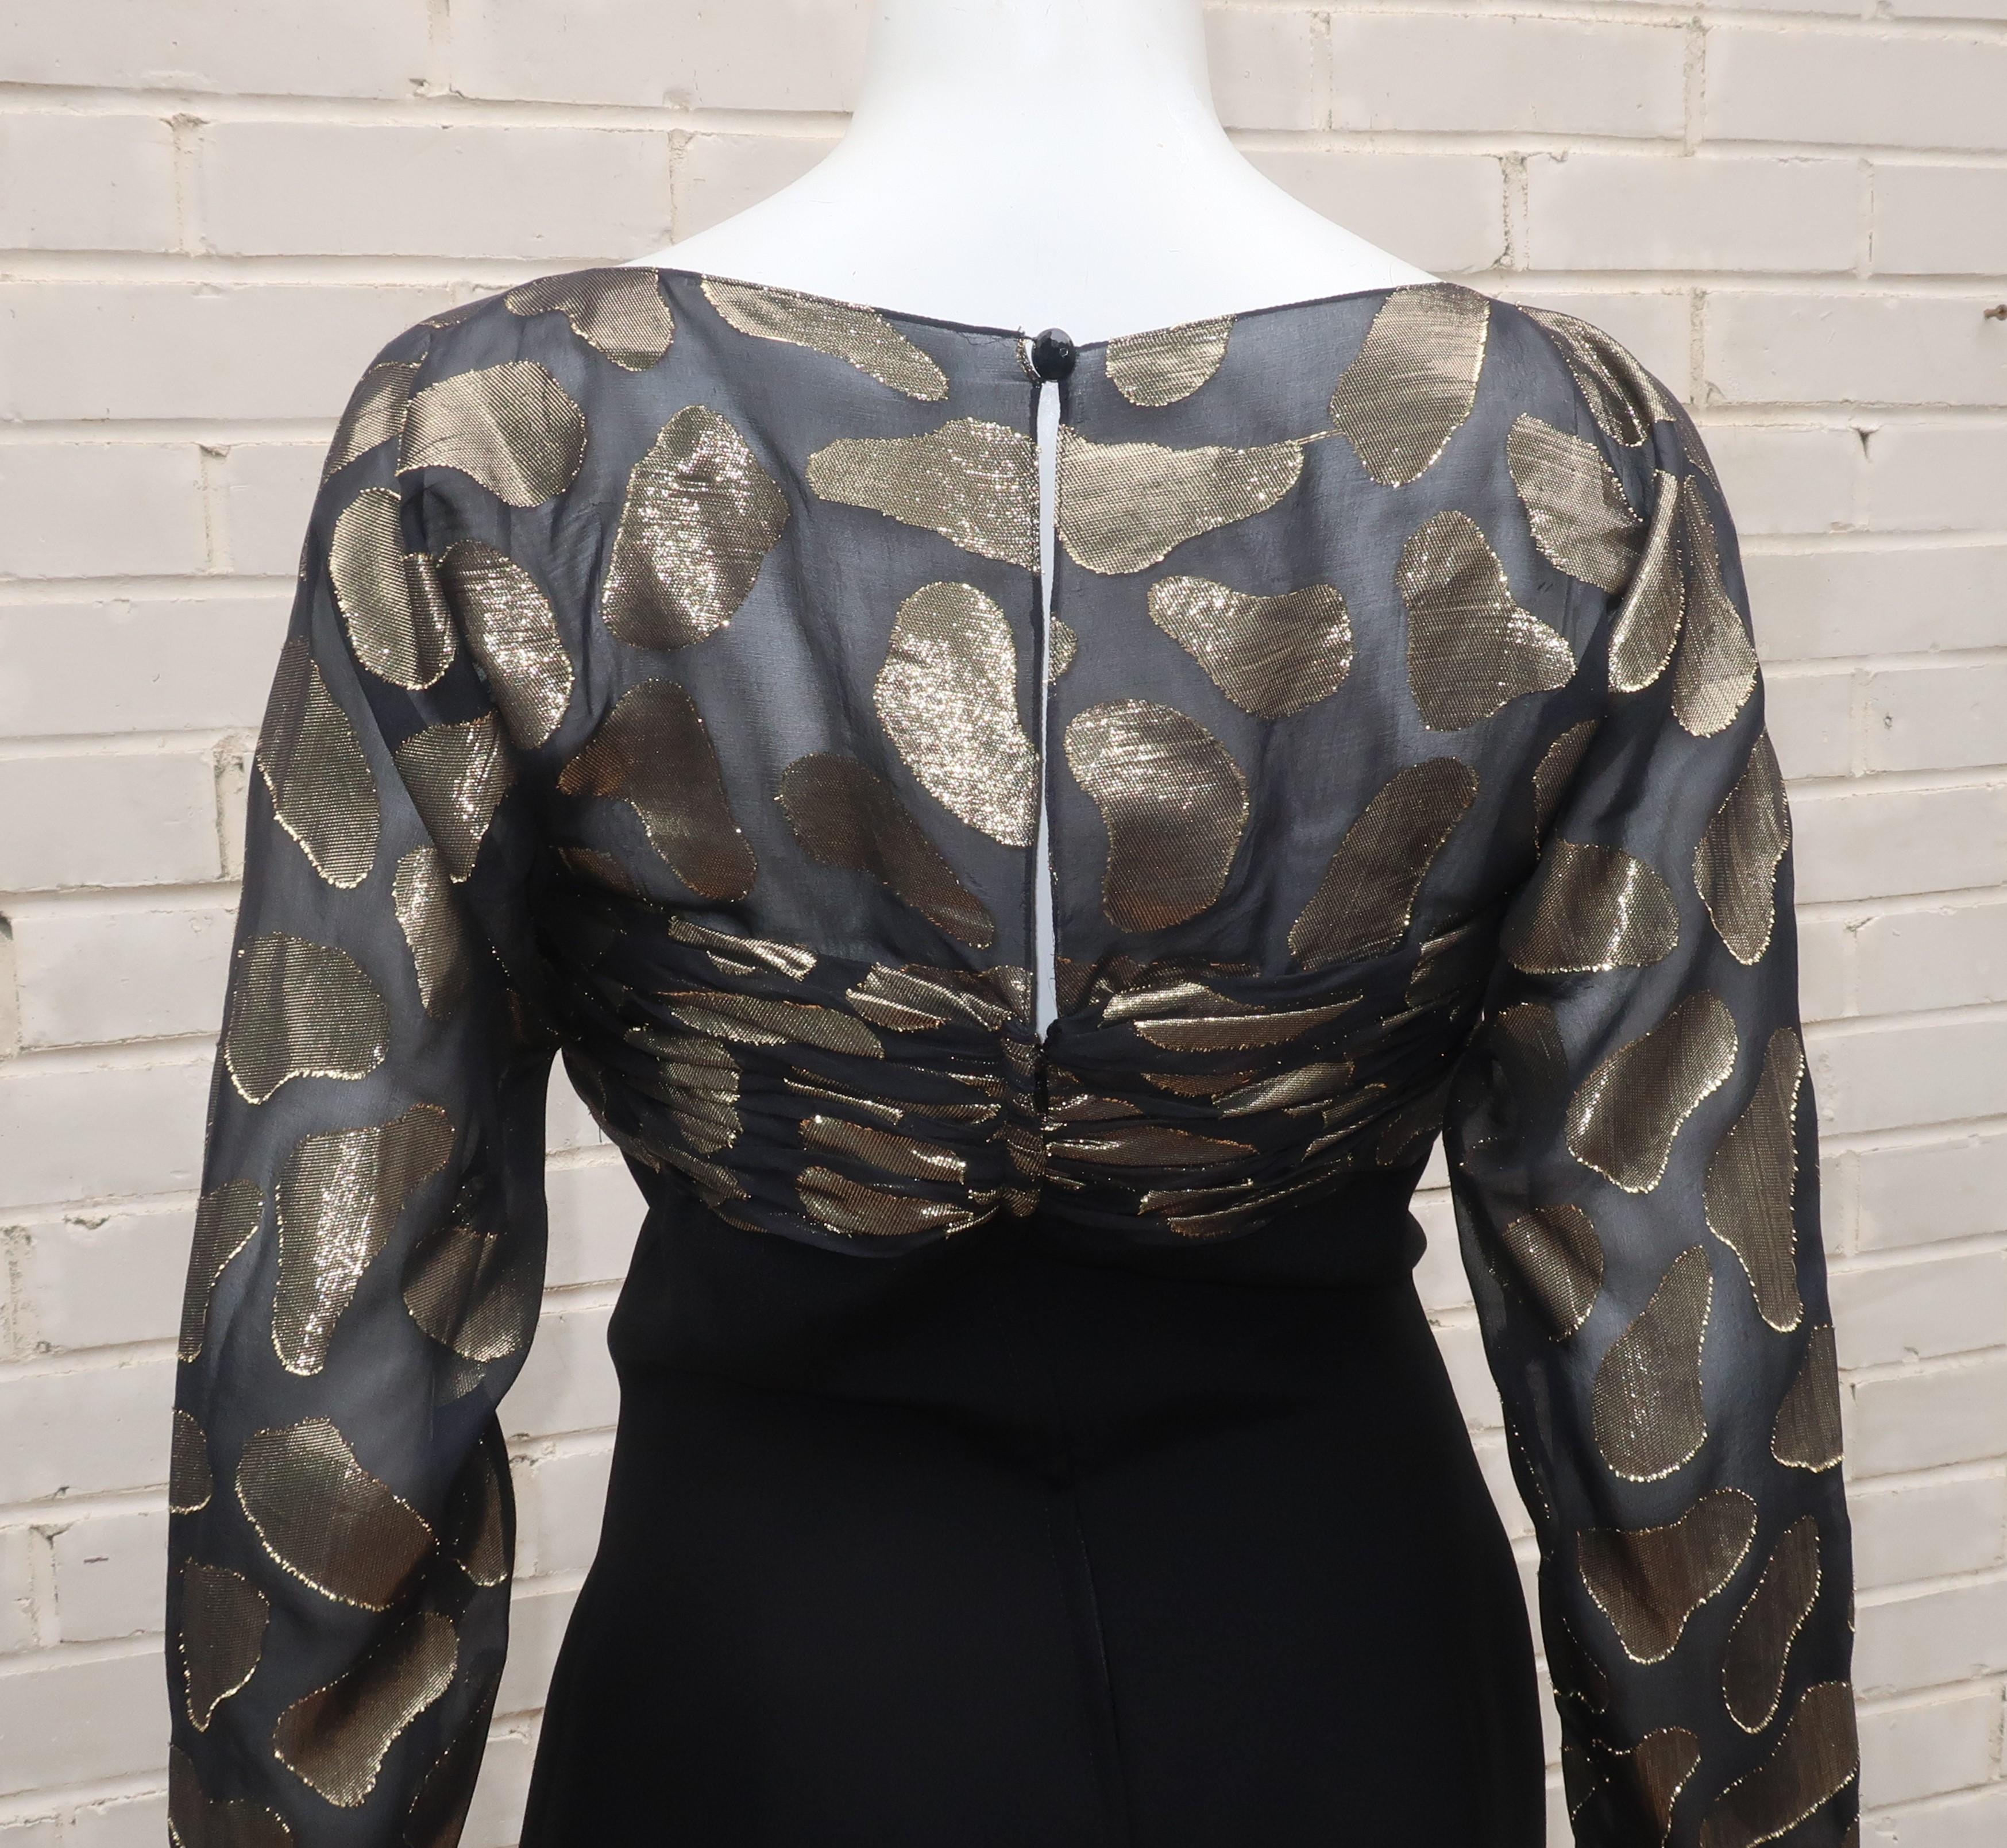 Snooty Hooty Black Crepe & Gold Lamé Cocktail Dress, C.1980 For Sale 3